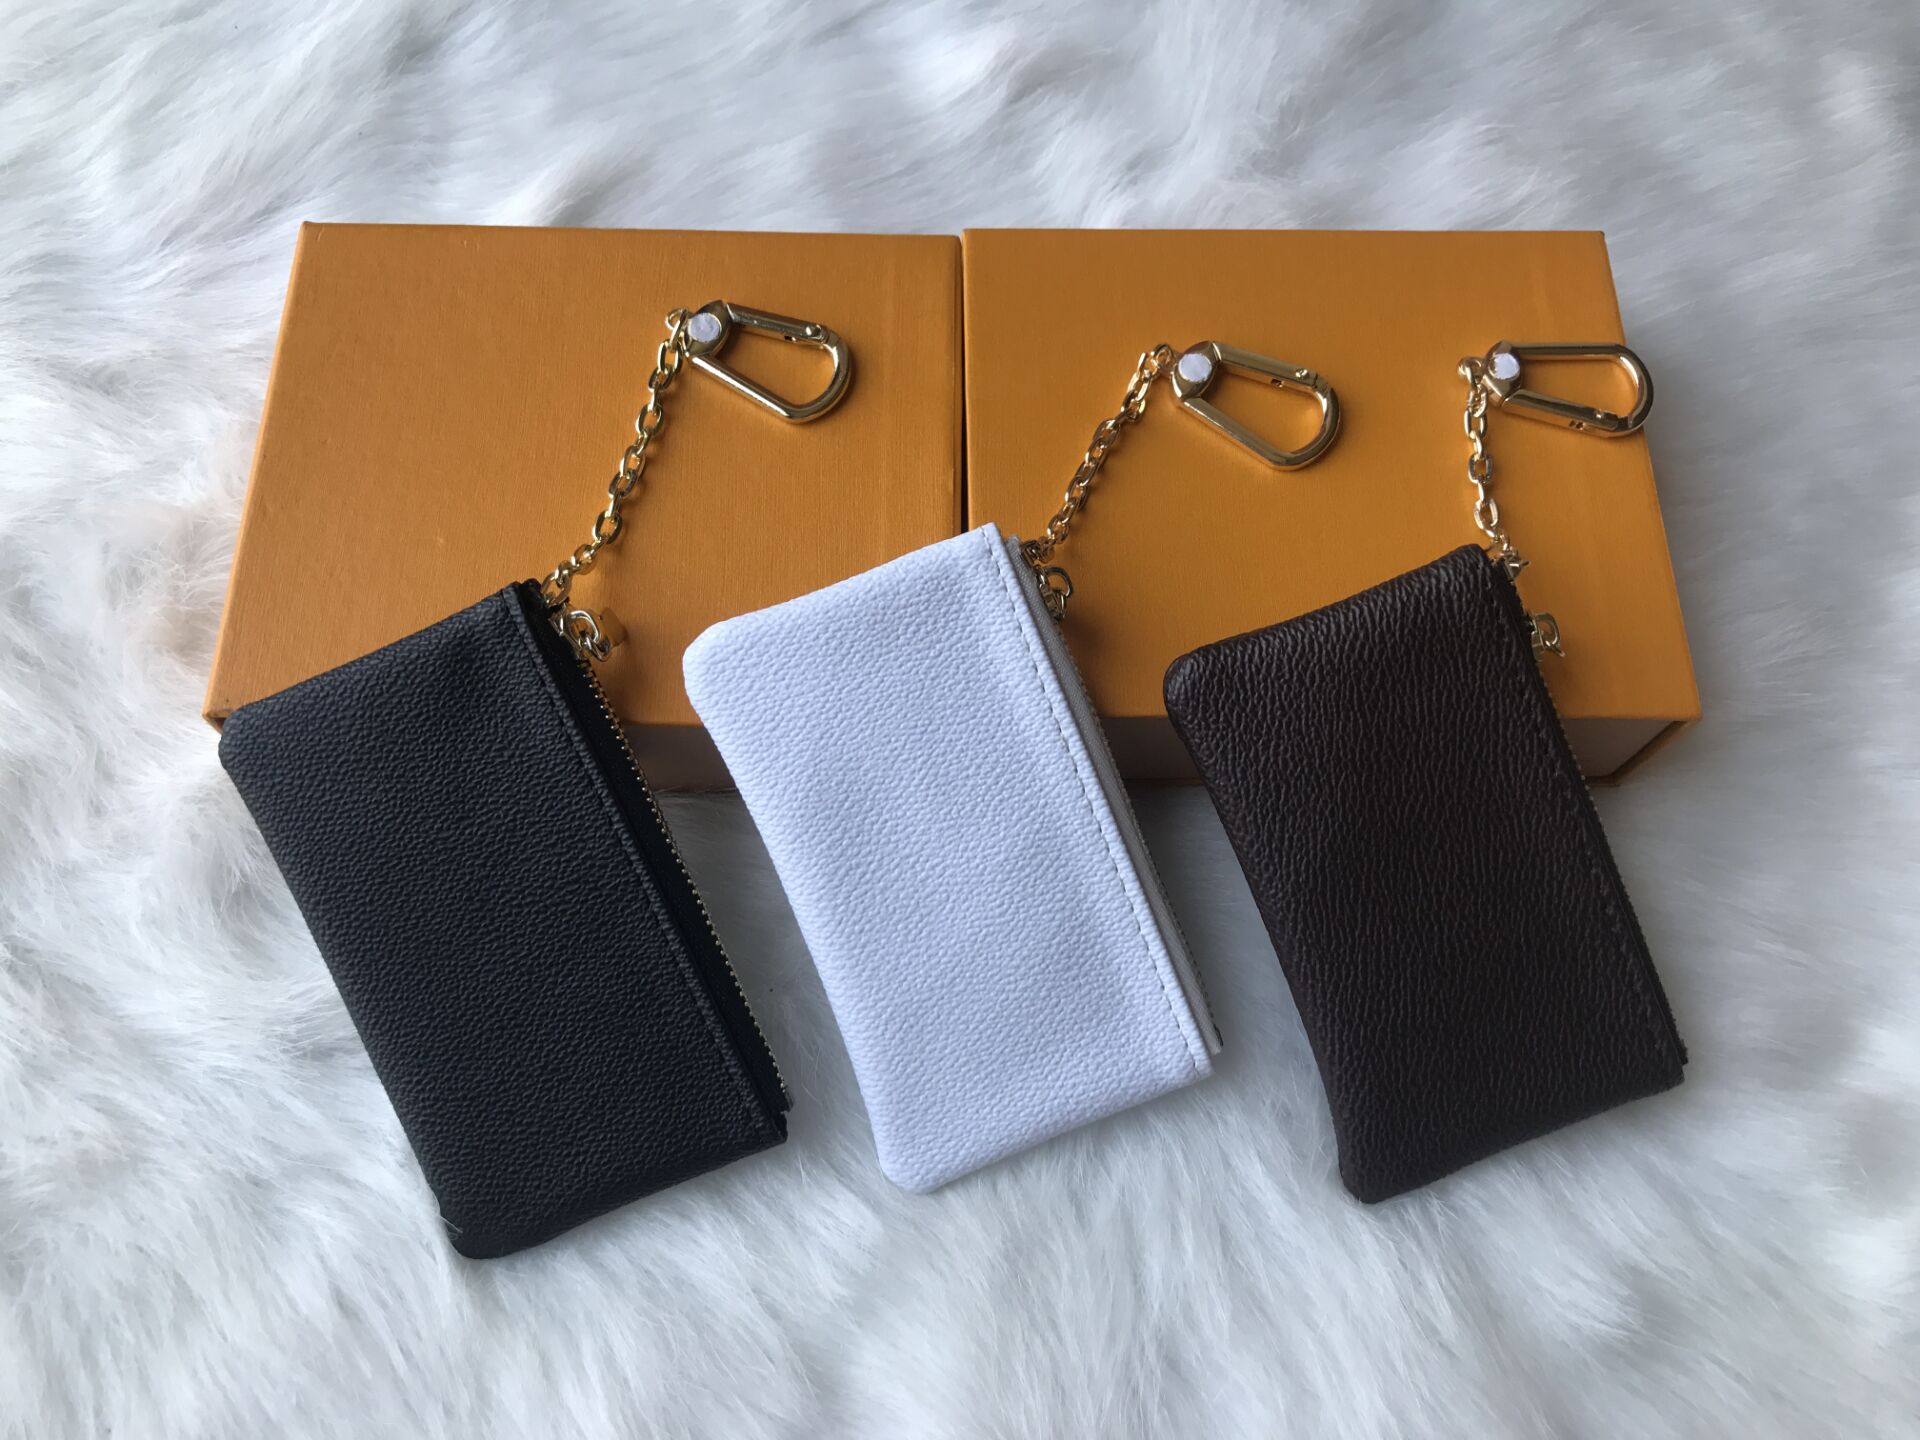 Women’s Leather Wallets Are a Sign of Fashion and Style